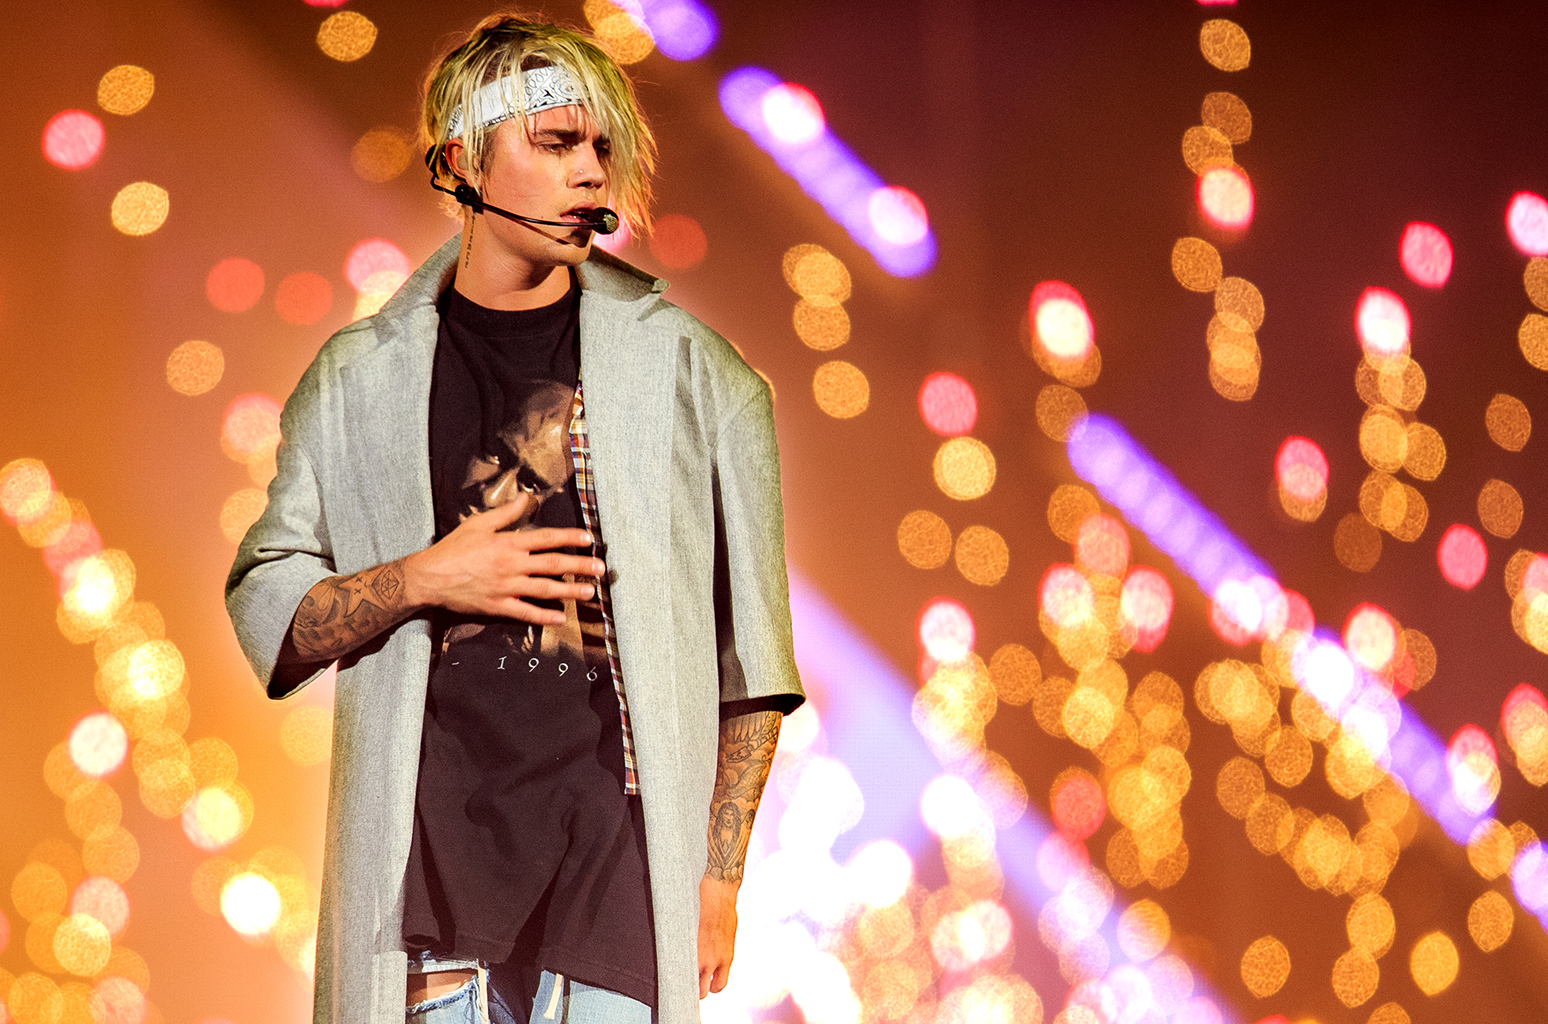 Let’s See How Much Random Trivia You Reallllly Know. Can You Get 18/24 on This Quiz? Justin Bieber